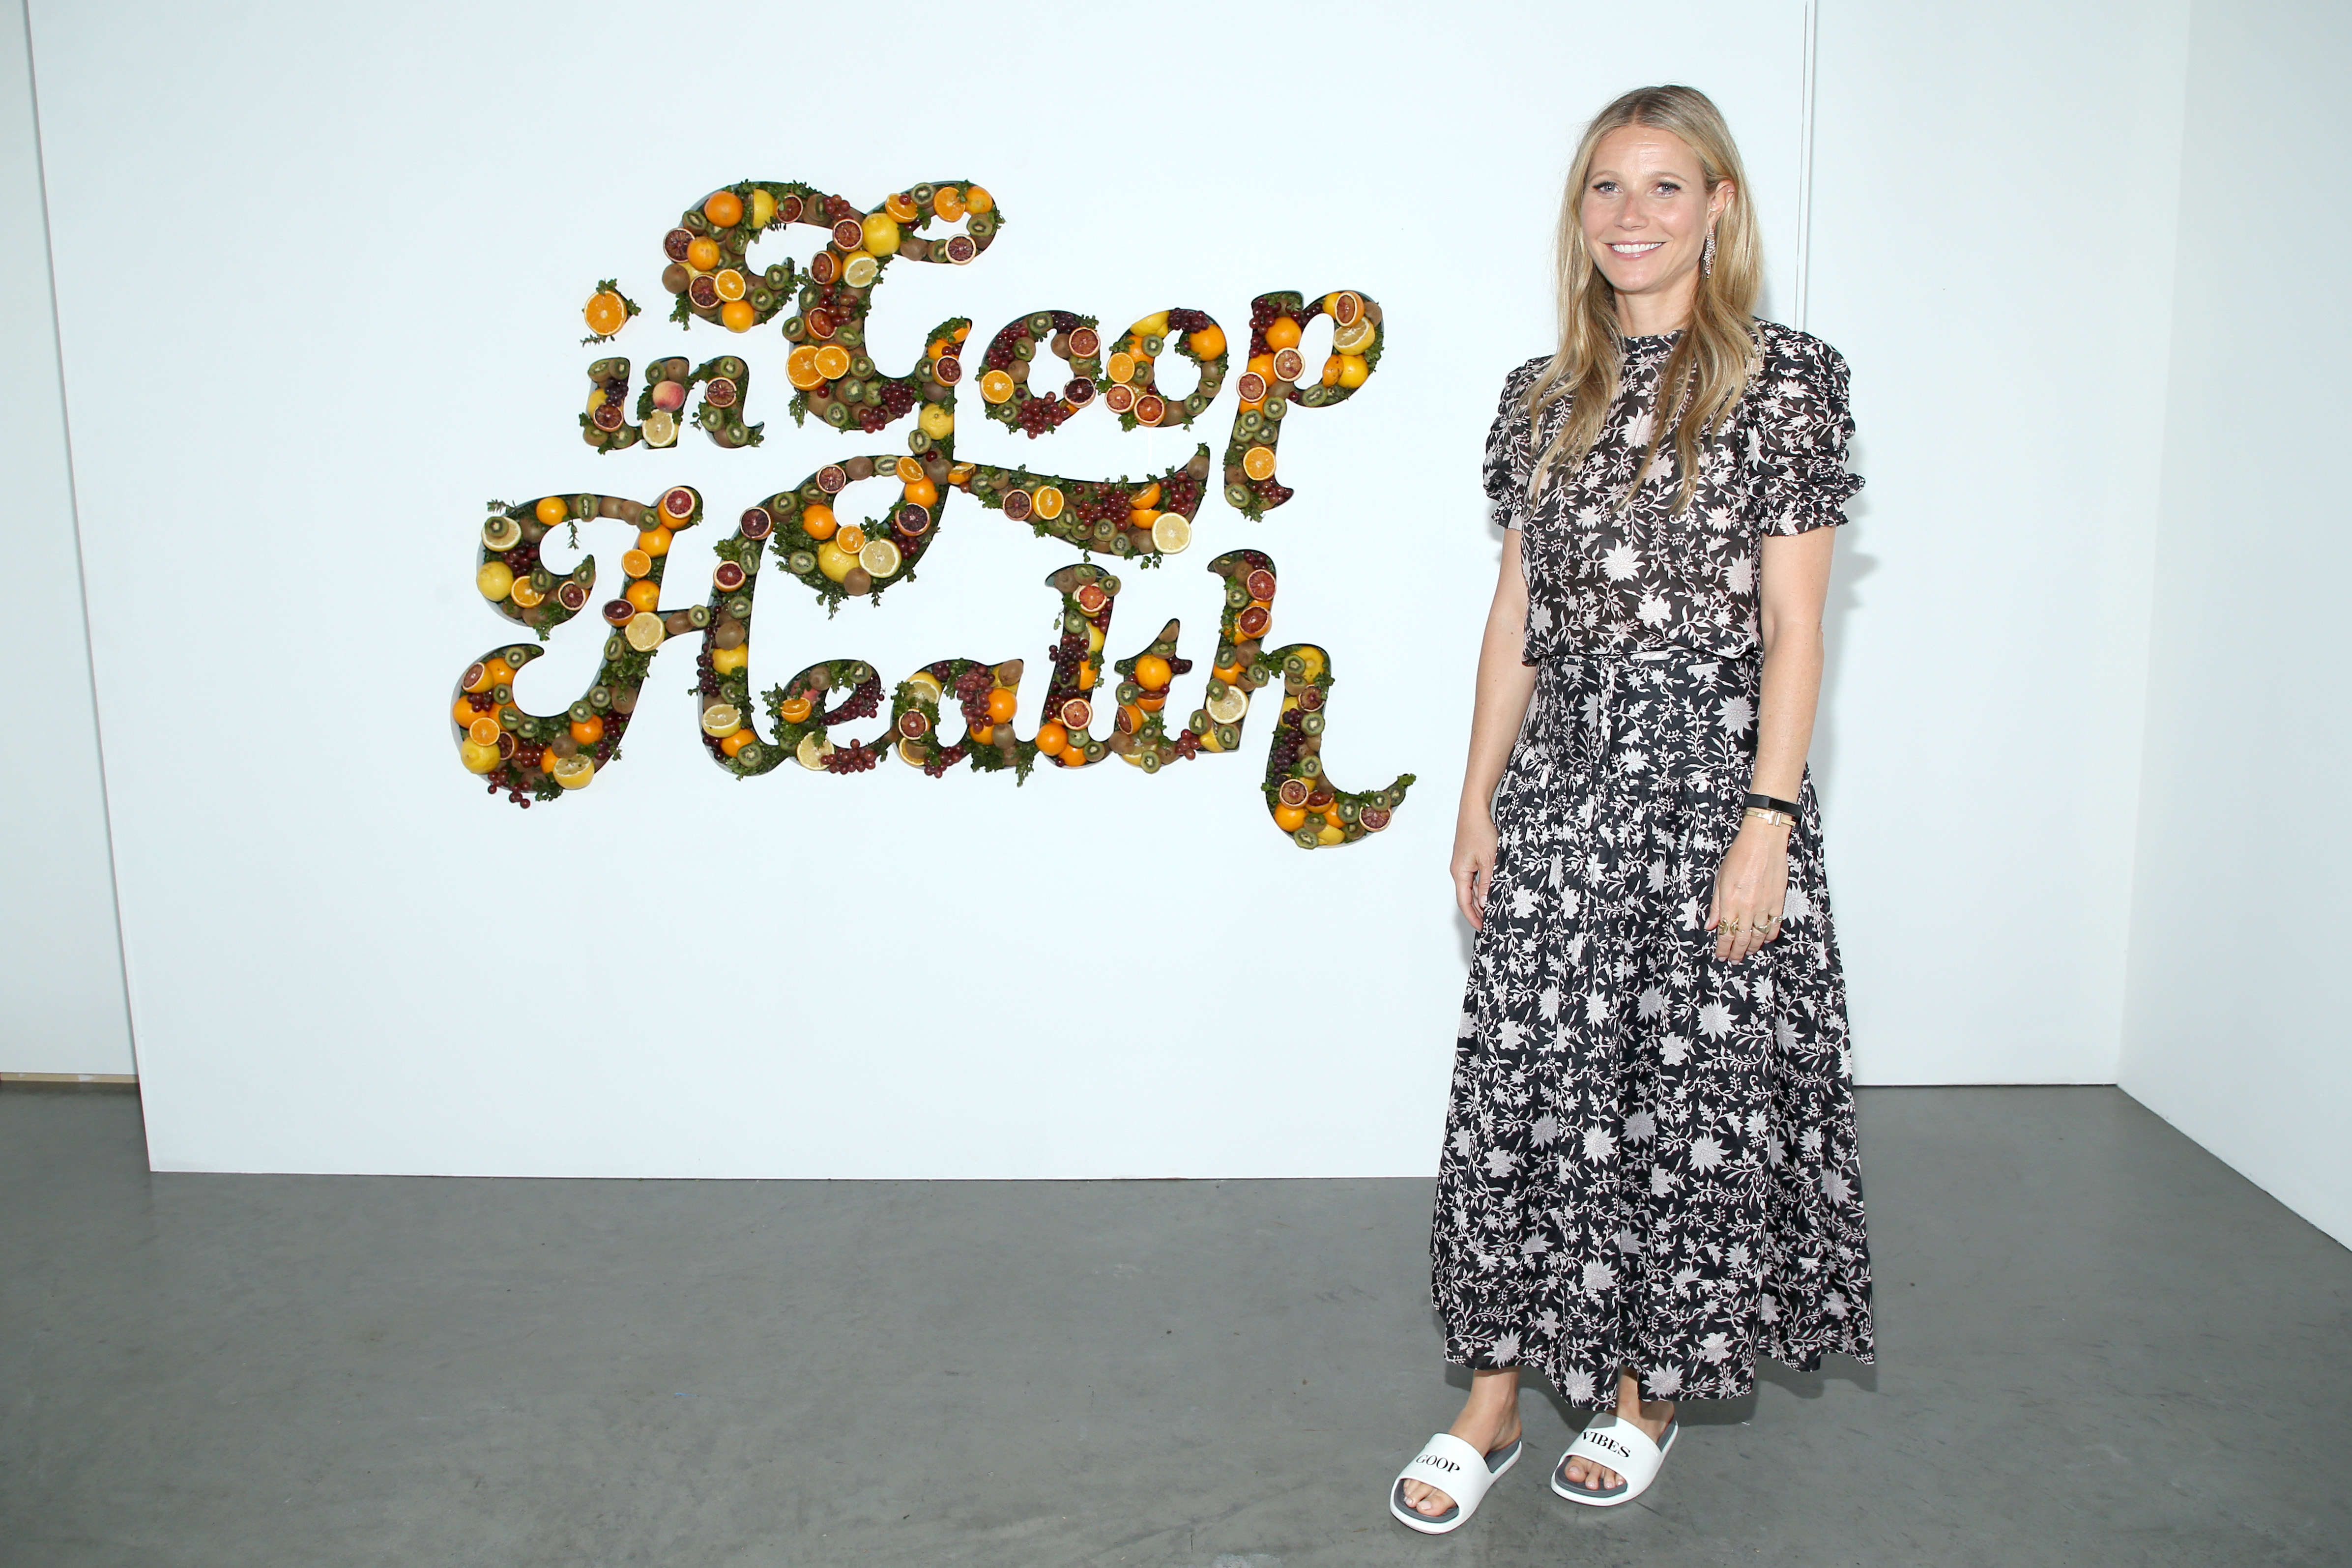 Gwyneth Paltrow’s Goop celebrated 10 years at dinner at Chucs in London